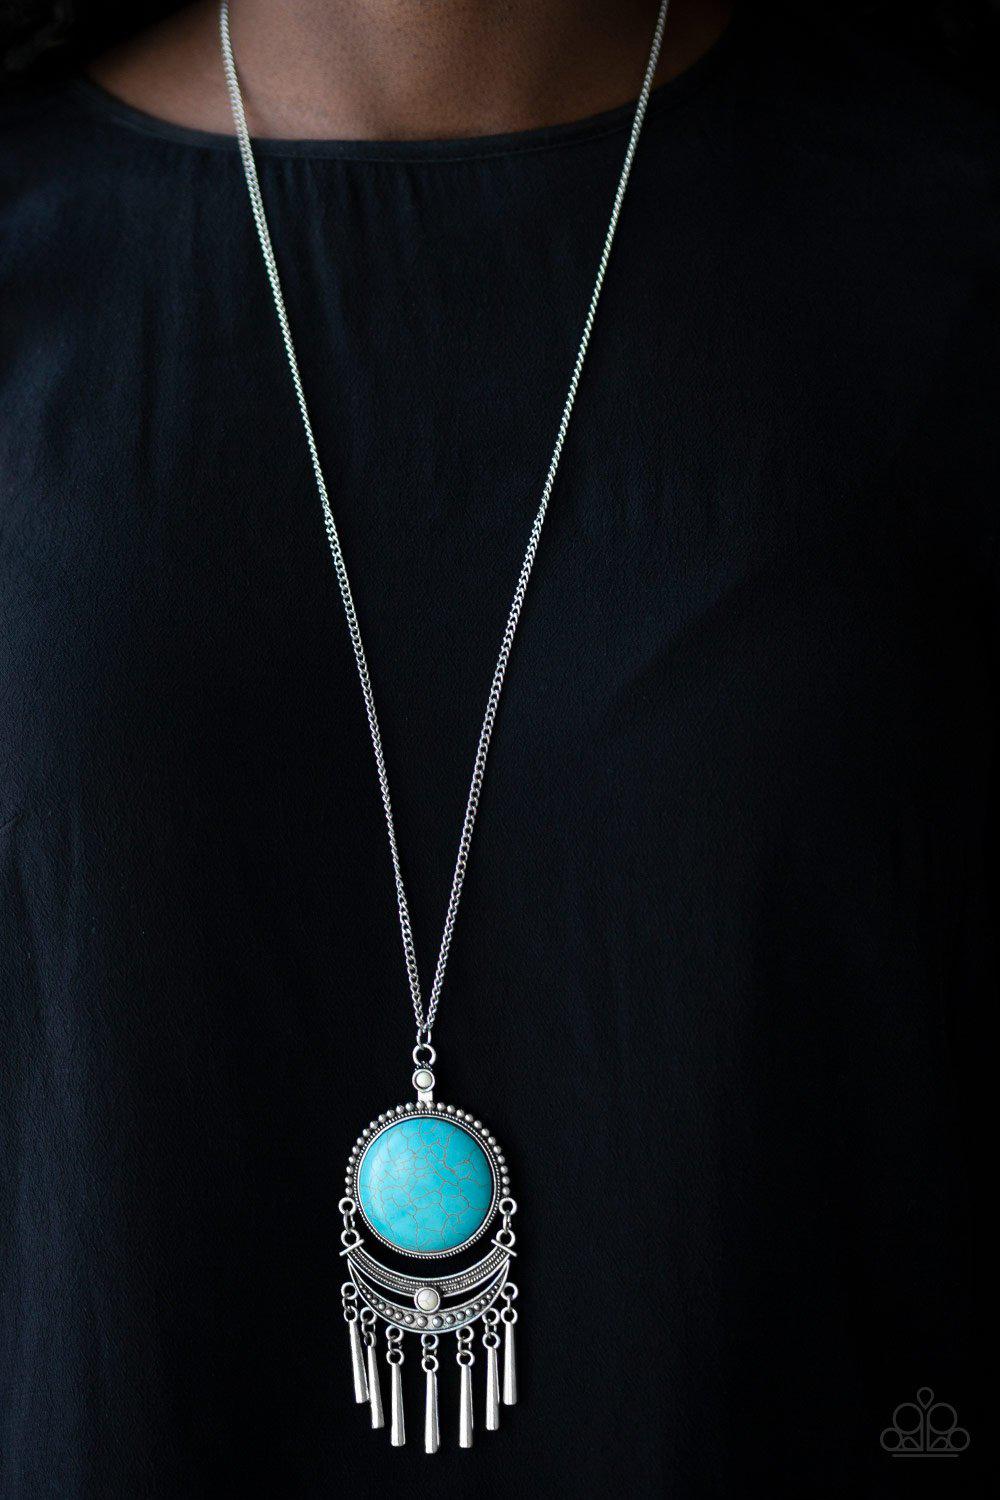 Rural Rustler Multi Turquoise Blue and White Stone Necklace - Paparazzi Accessories- lightbox - CarasShop.com - $5 Jewelry by Cara Jewels